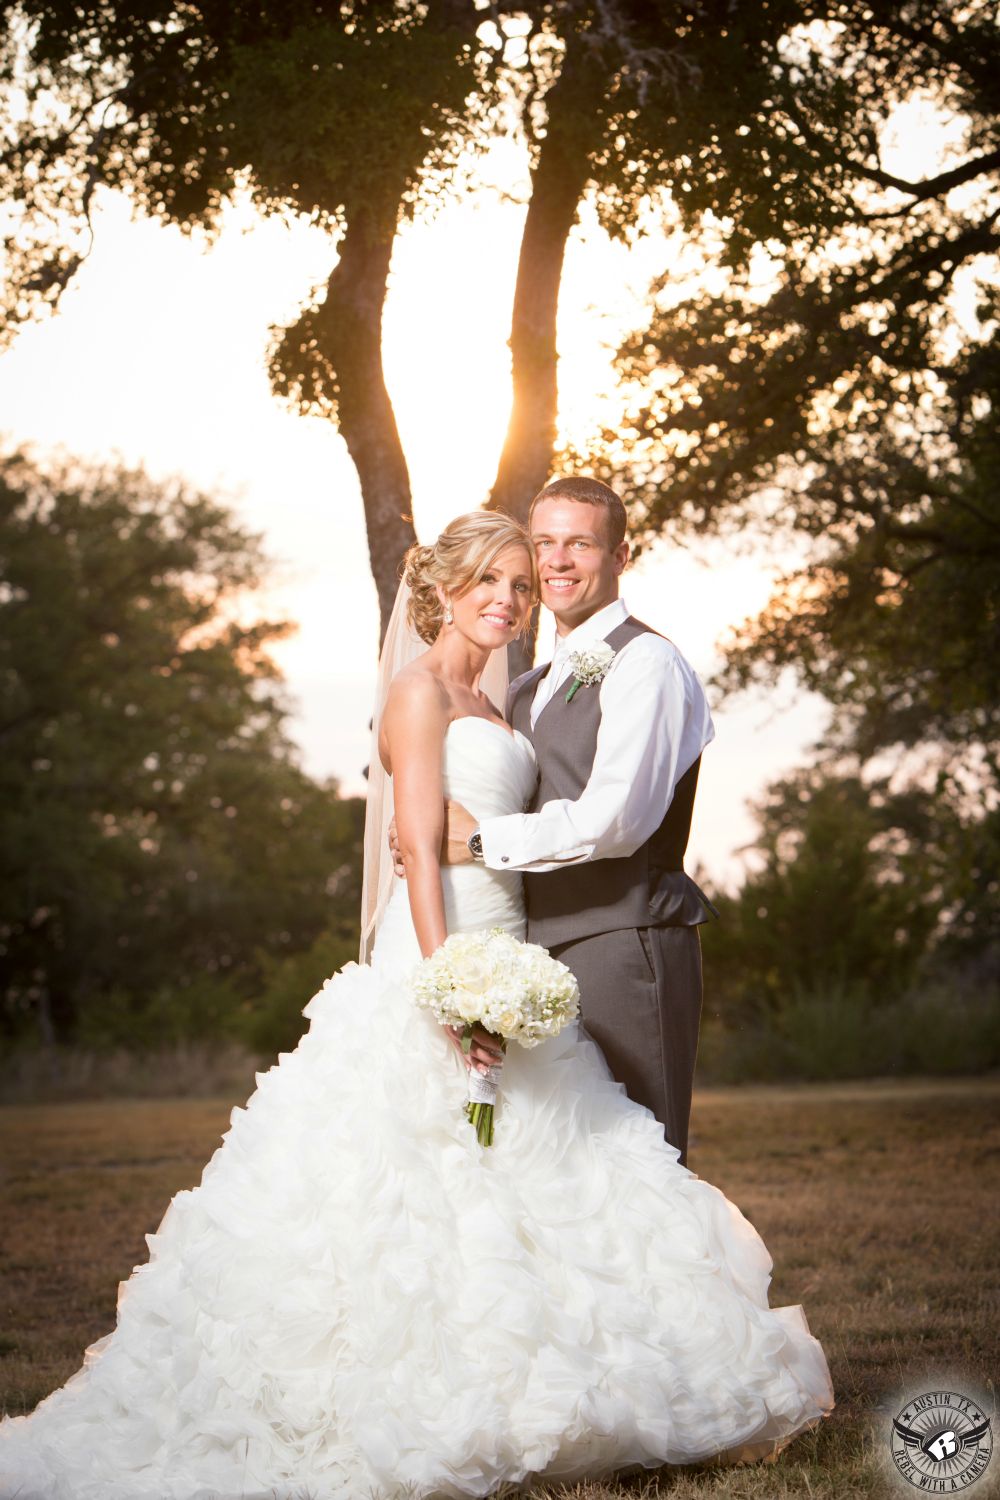 Austin wedding photography of beautiful bride with makeup my Maris Malone Calderon and hair by Jen Hoover from Pearl Studio Austin in ruffled wedding gown from Cloud 9 bridal in Georgetown, Texas, with white hydrangea and rose bridal bouquet from Zuzu's Petals and groom in grey tuxedo pants and vest at Kindred Oaks wedding venue in Austin.